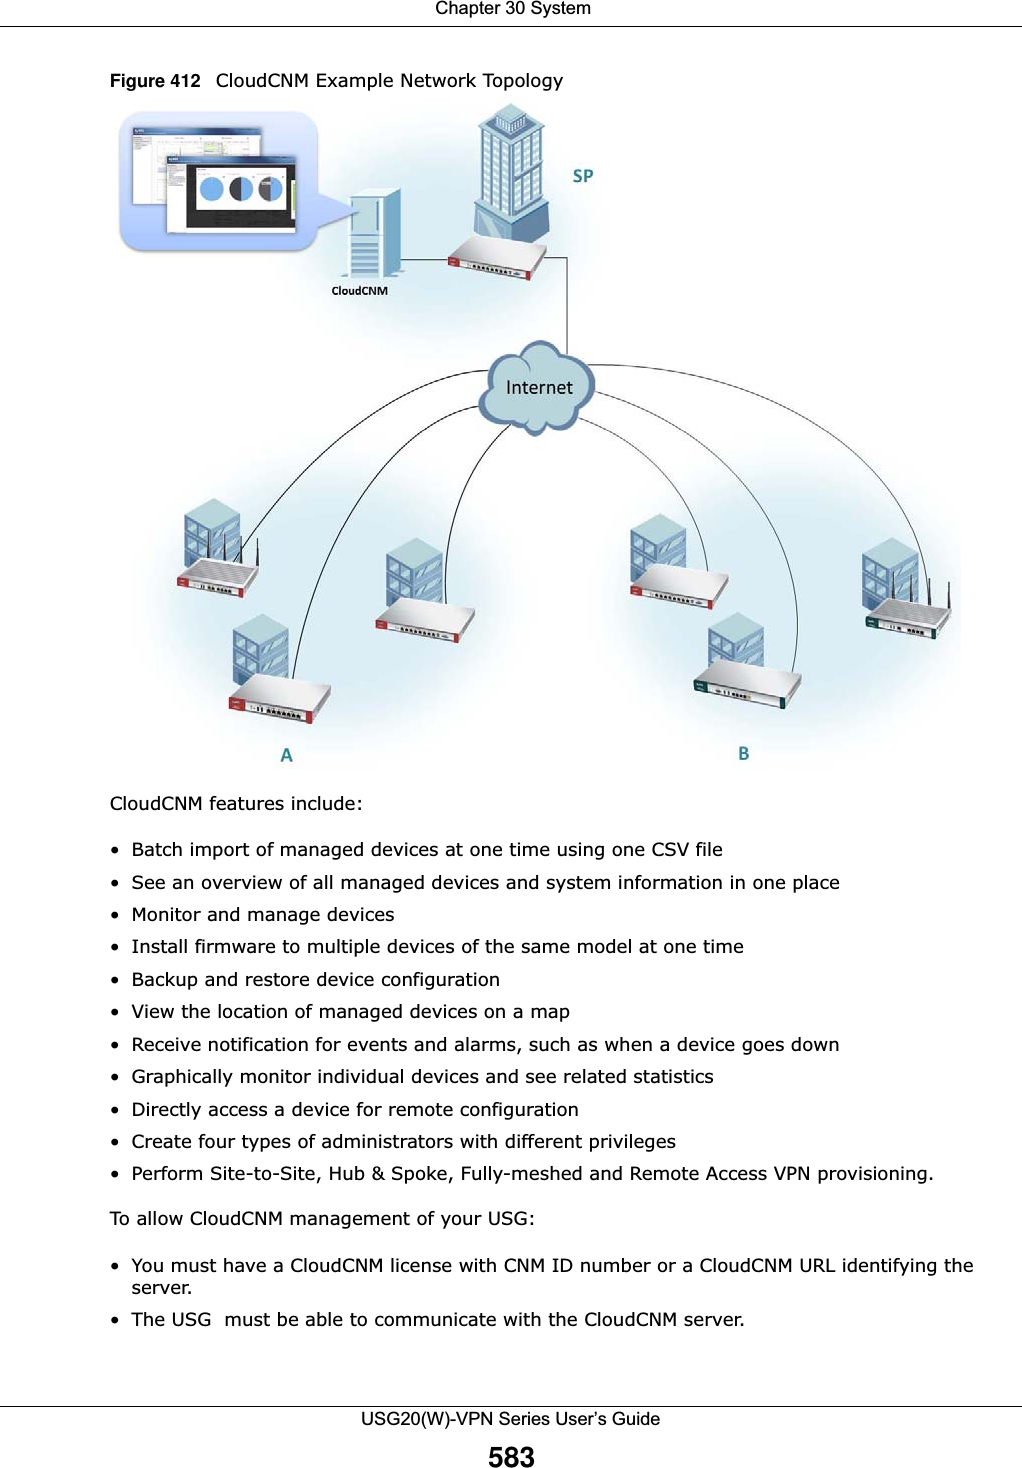  Chapter 30 SystemUSG20(W)-VPN Series User’s Guide583Figure 412   CloudCNM Example Network Topology CloudCNM features include:• Batch import of managed devices at one time using one CSV file• See an overview of all managed devices and system information in one place• Monitor and manage devices• Install firmware to multiple devices of the same model at one time• Backup and restore device configuration• View the location of managed devices on a map• Receive notification for events and alarms, such as when a device goes down• Graphically monitor individual devices and see related statistics• Directly access a device for remote configuration• Create four types of administrators with different privileges• Perform Site-to-Site, Hub &amp; Spoke, Fully-meshed and Remote Access VPN provisioning.To allow CloudCNM management of your USG:• You must have a CloudCNM license with CNM ID number or a CloudCNM URL identifying the server.• The USG  must be able to communicate with the CloudCNM server.